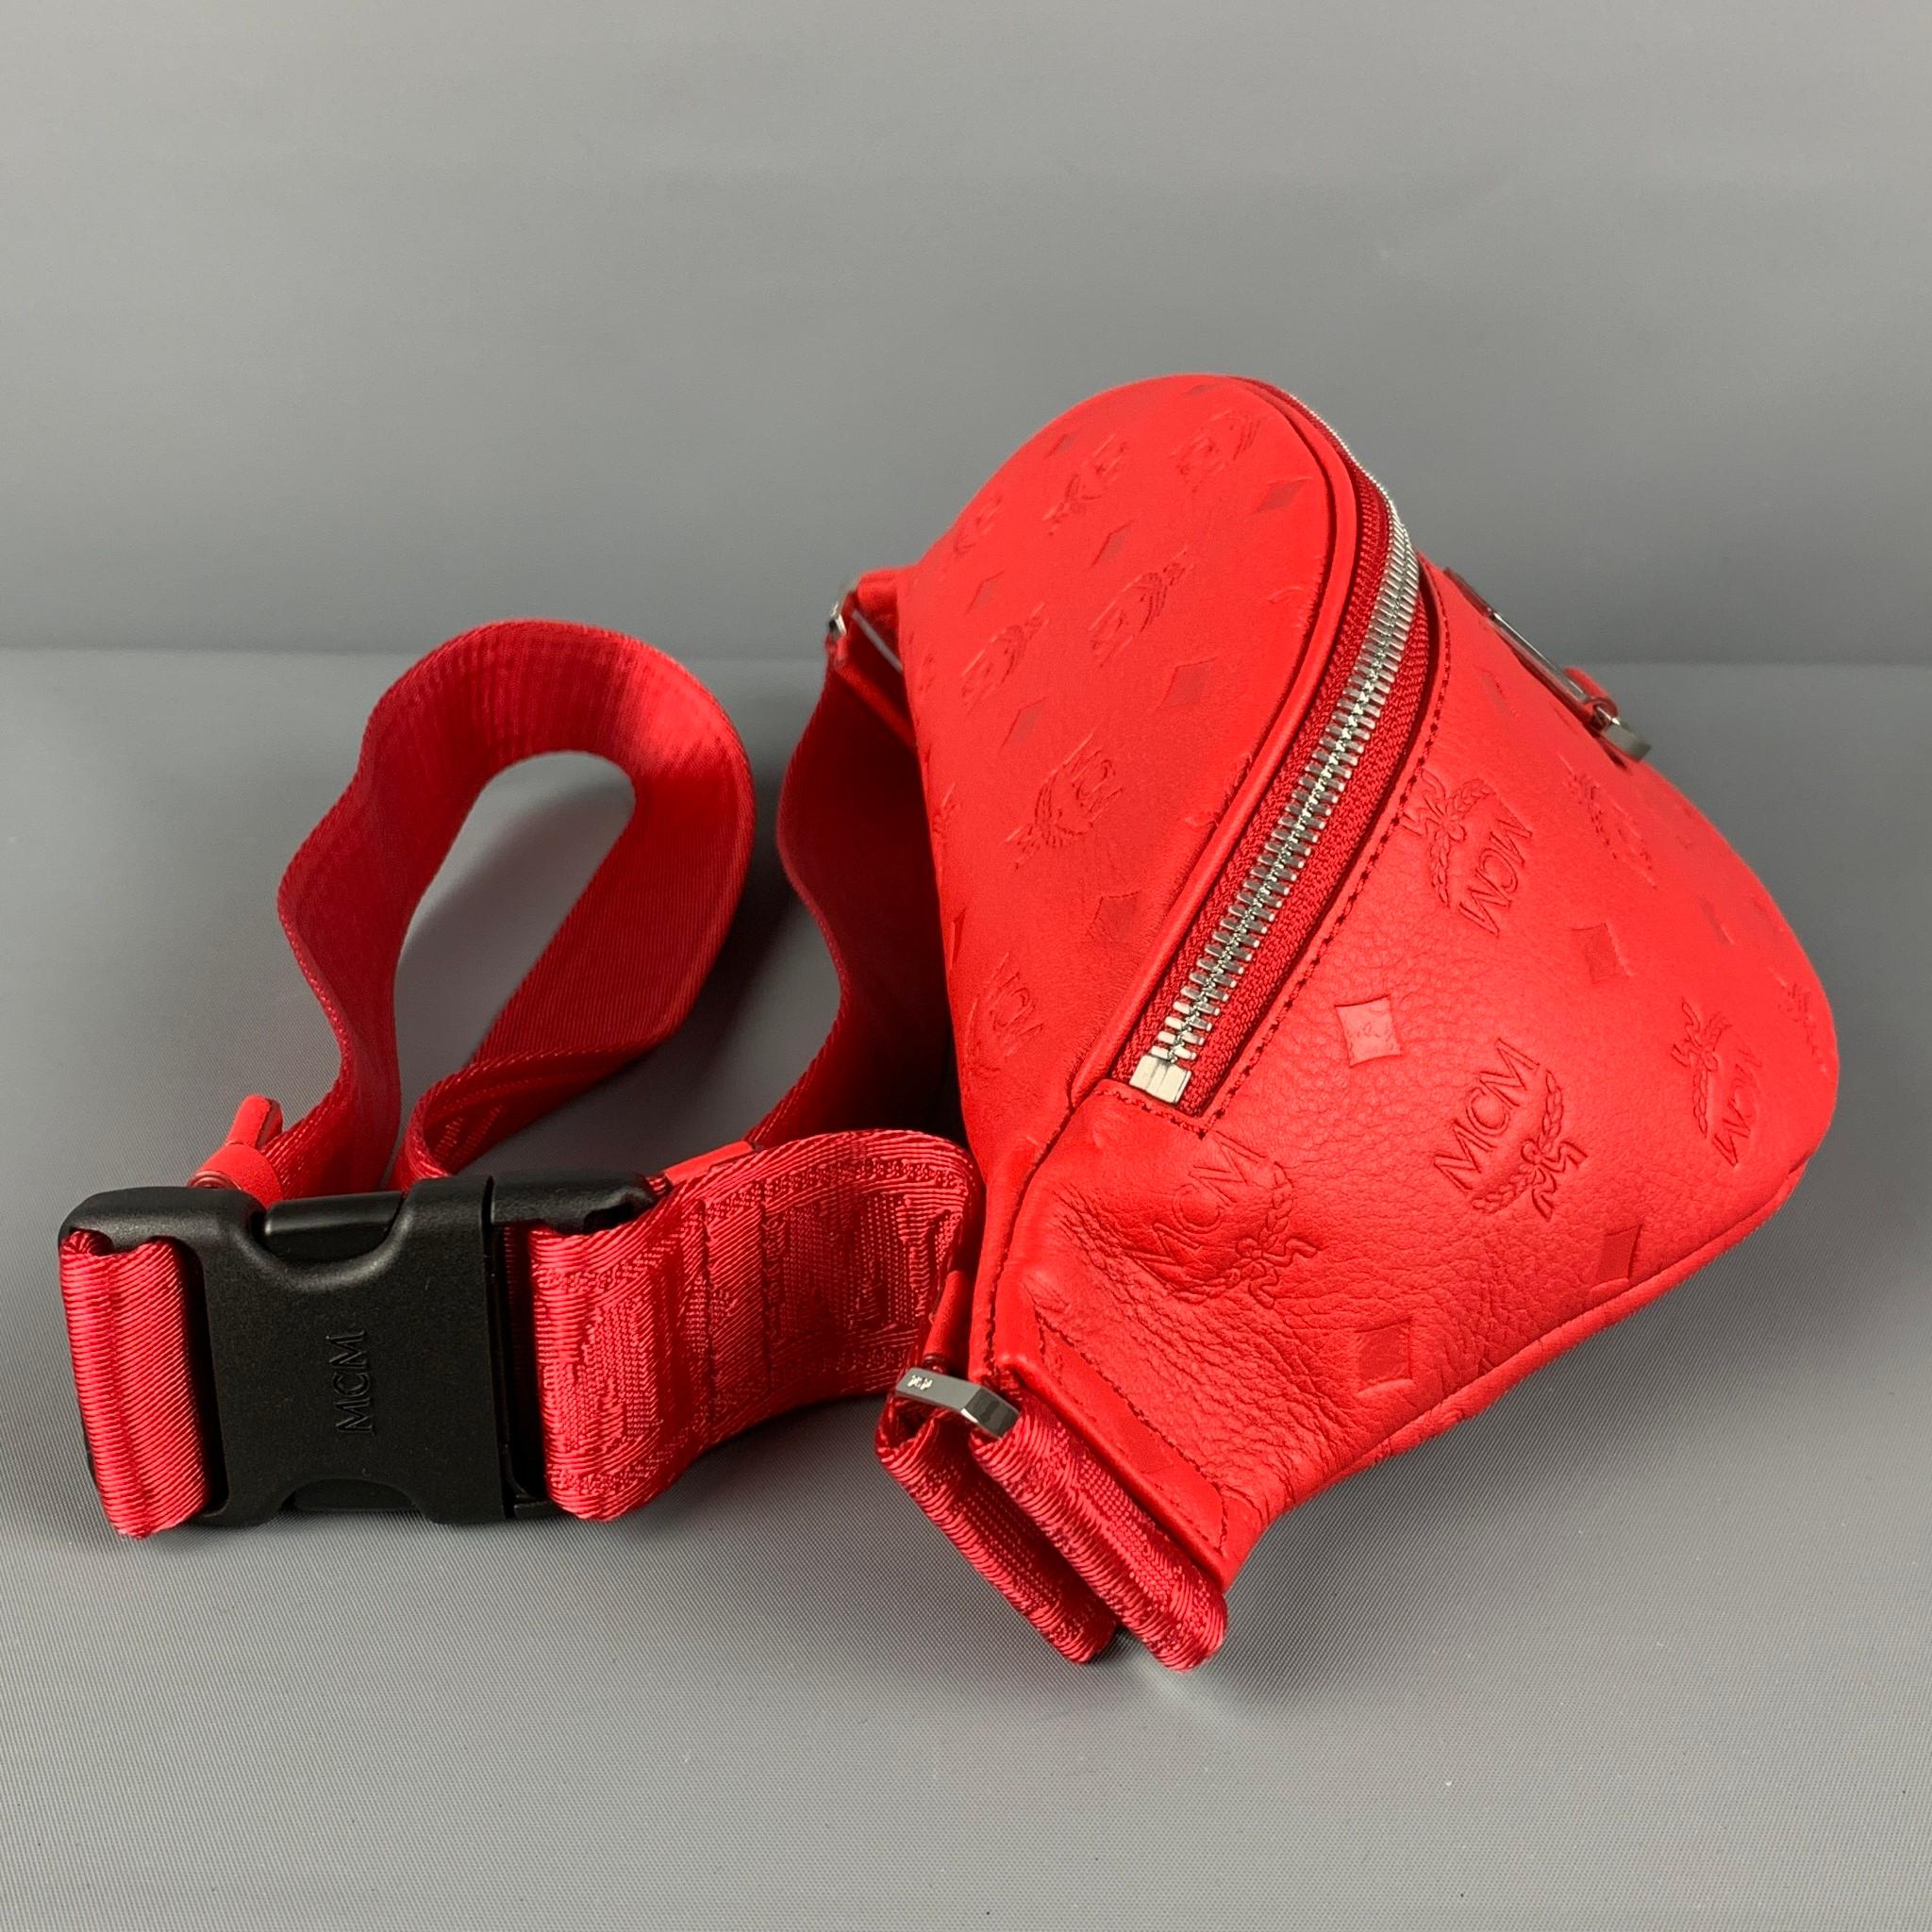 MCM belt pack comes in a red embossed monogram leather featuring a adjustable nylon strap, silver tone hardware, and a zipper closure. Comes with dust bag. 

New Without Tags. 
Original Retail Price: $640.00

Measurements:

Length: 16 in.
Width: